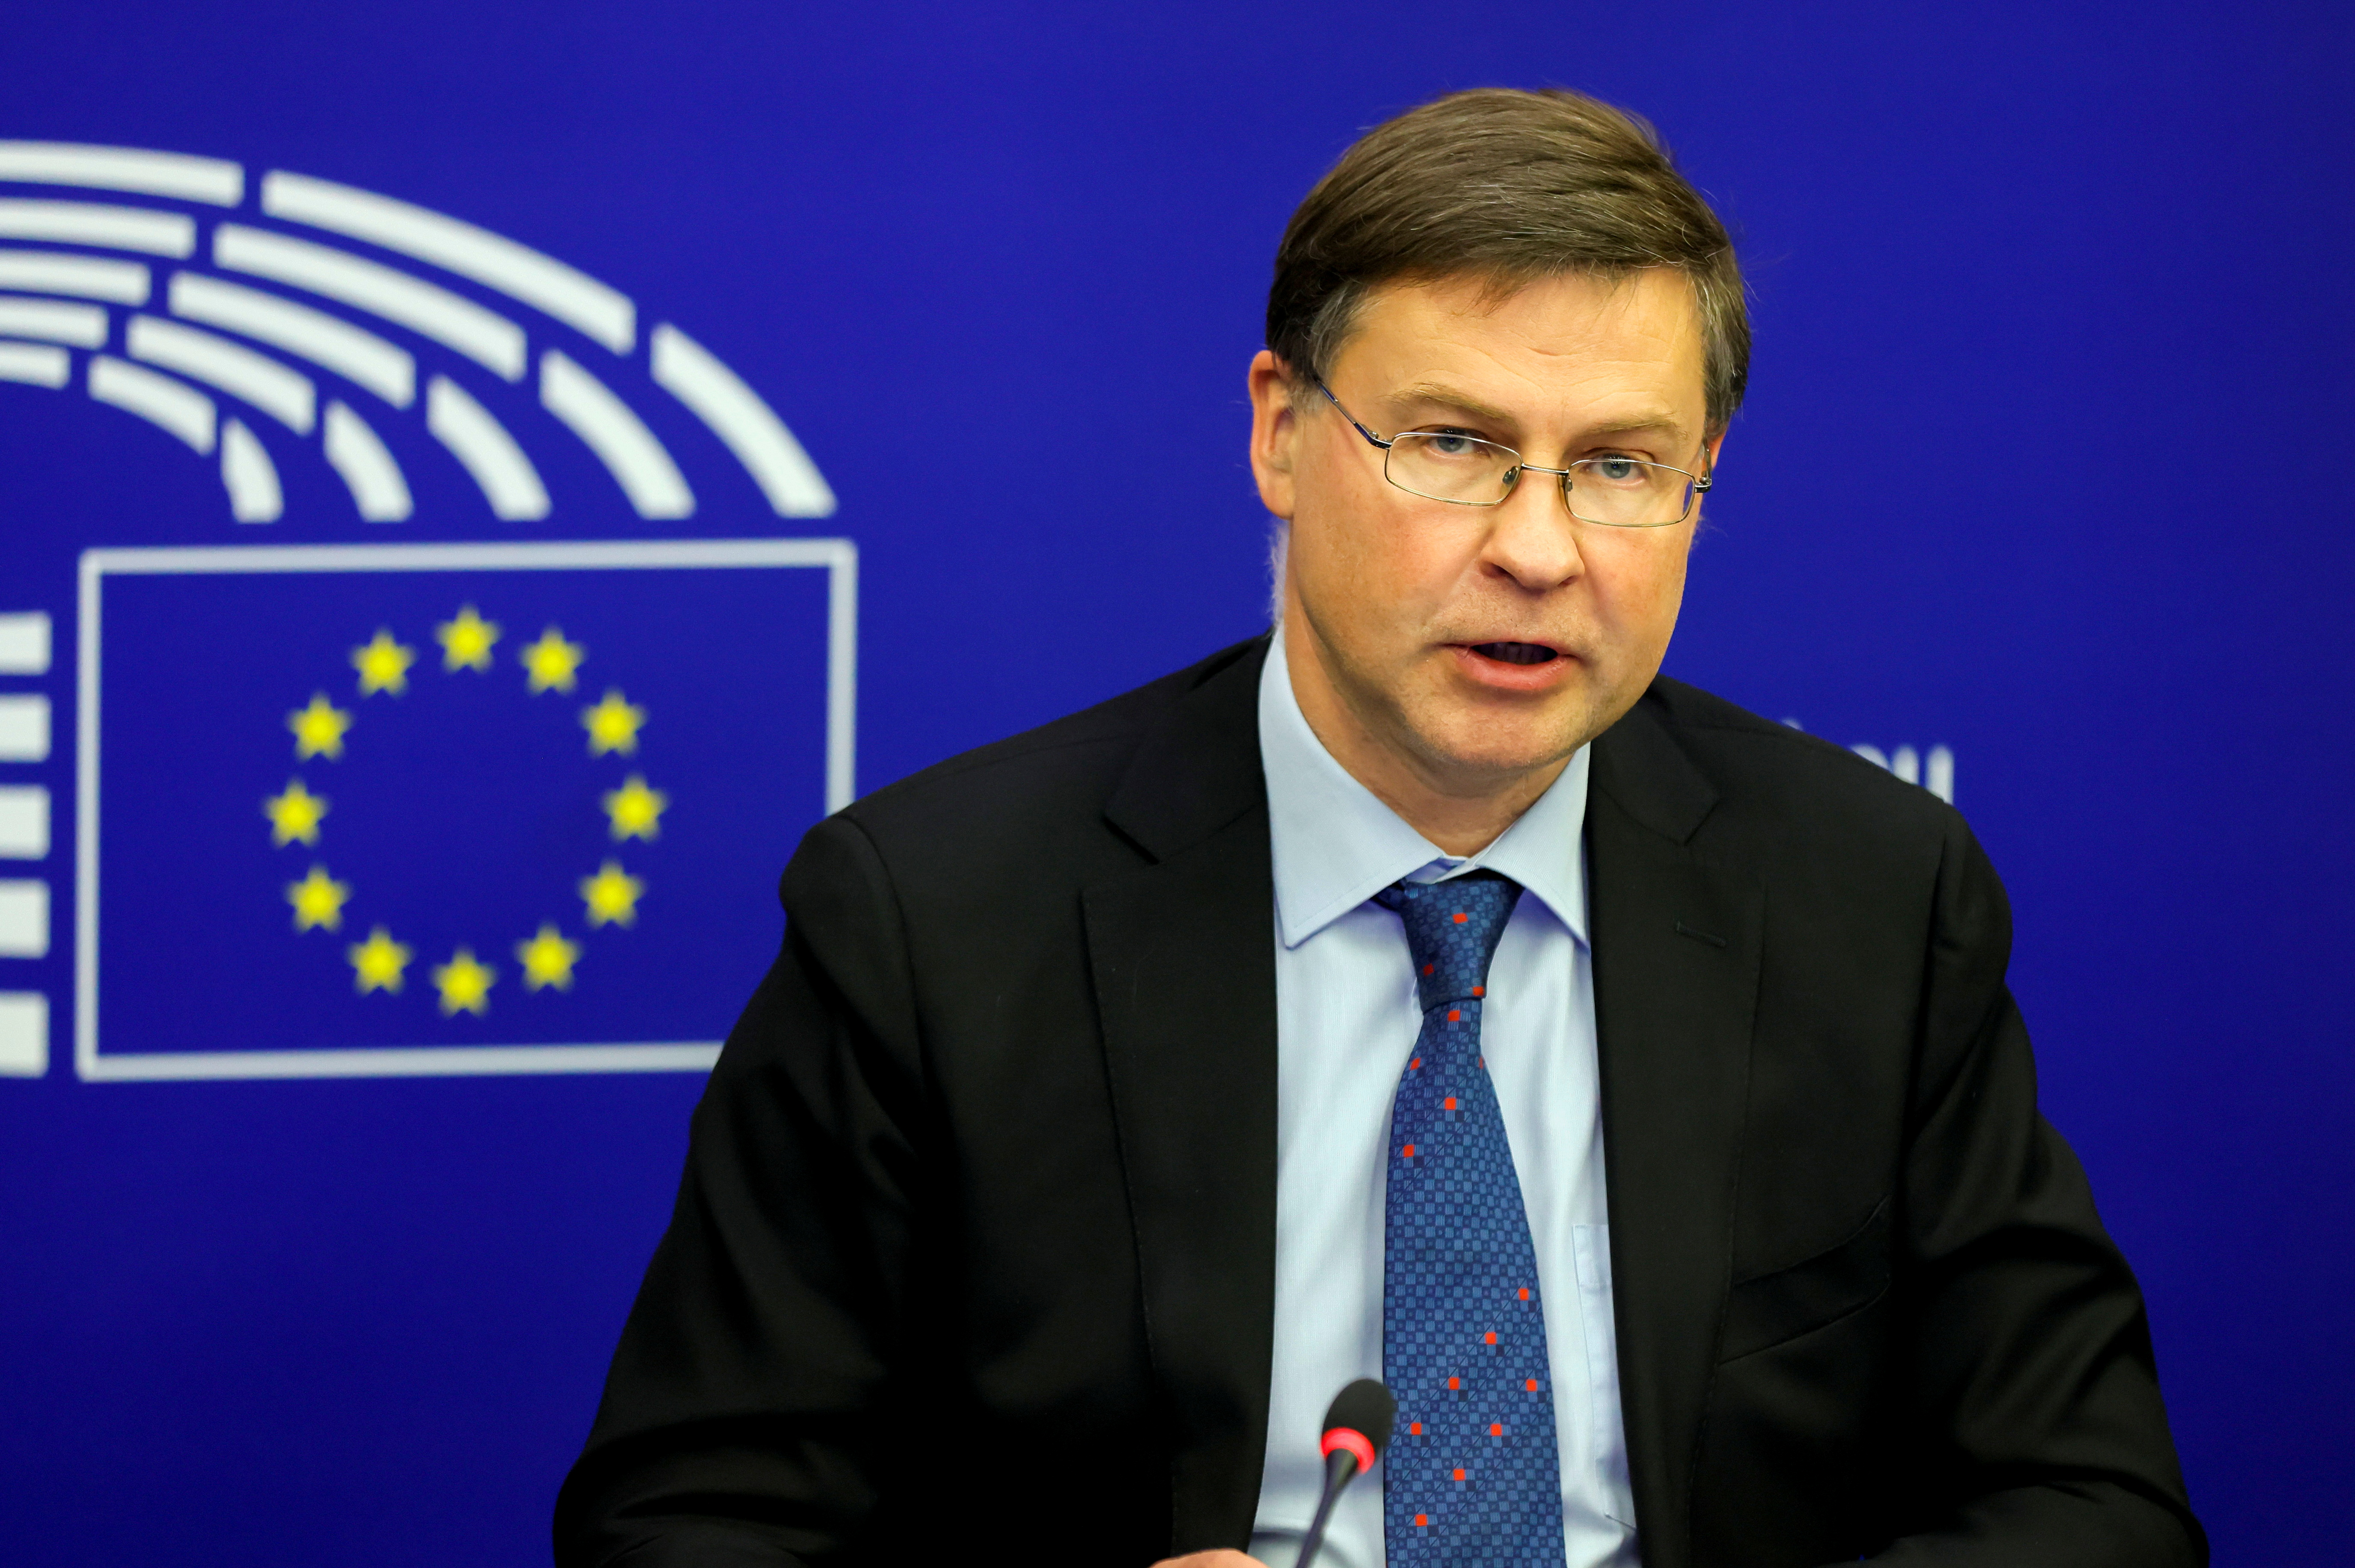 European Commission Executive Vice President Valdis Dombrovskis attend a press conference at European Parliament session in Strasbourg